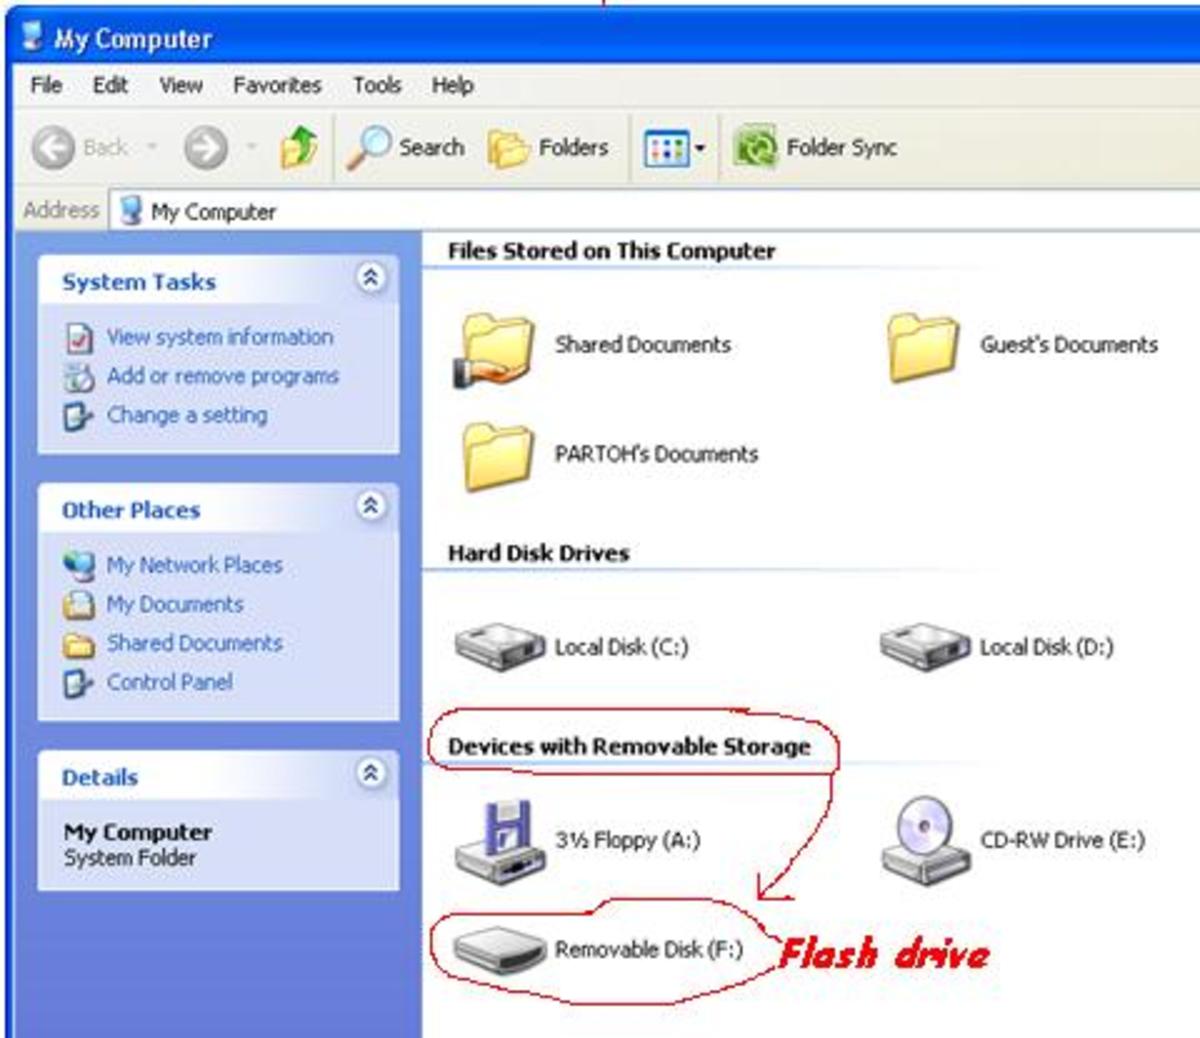 A flash drive using the default name.